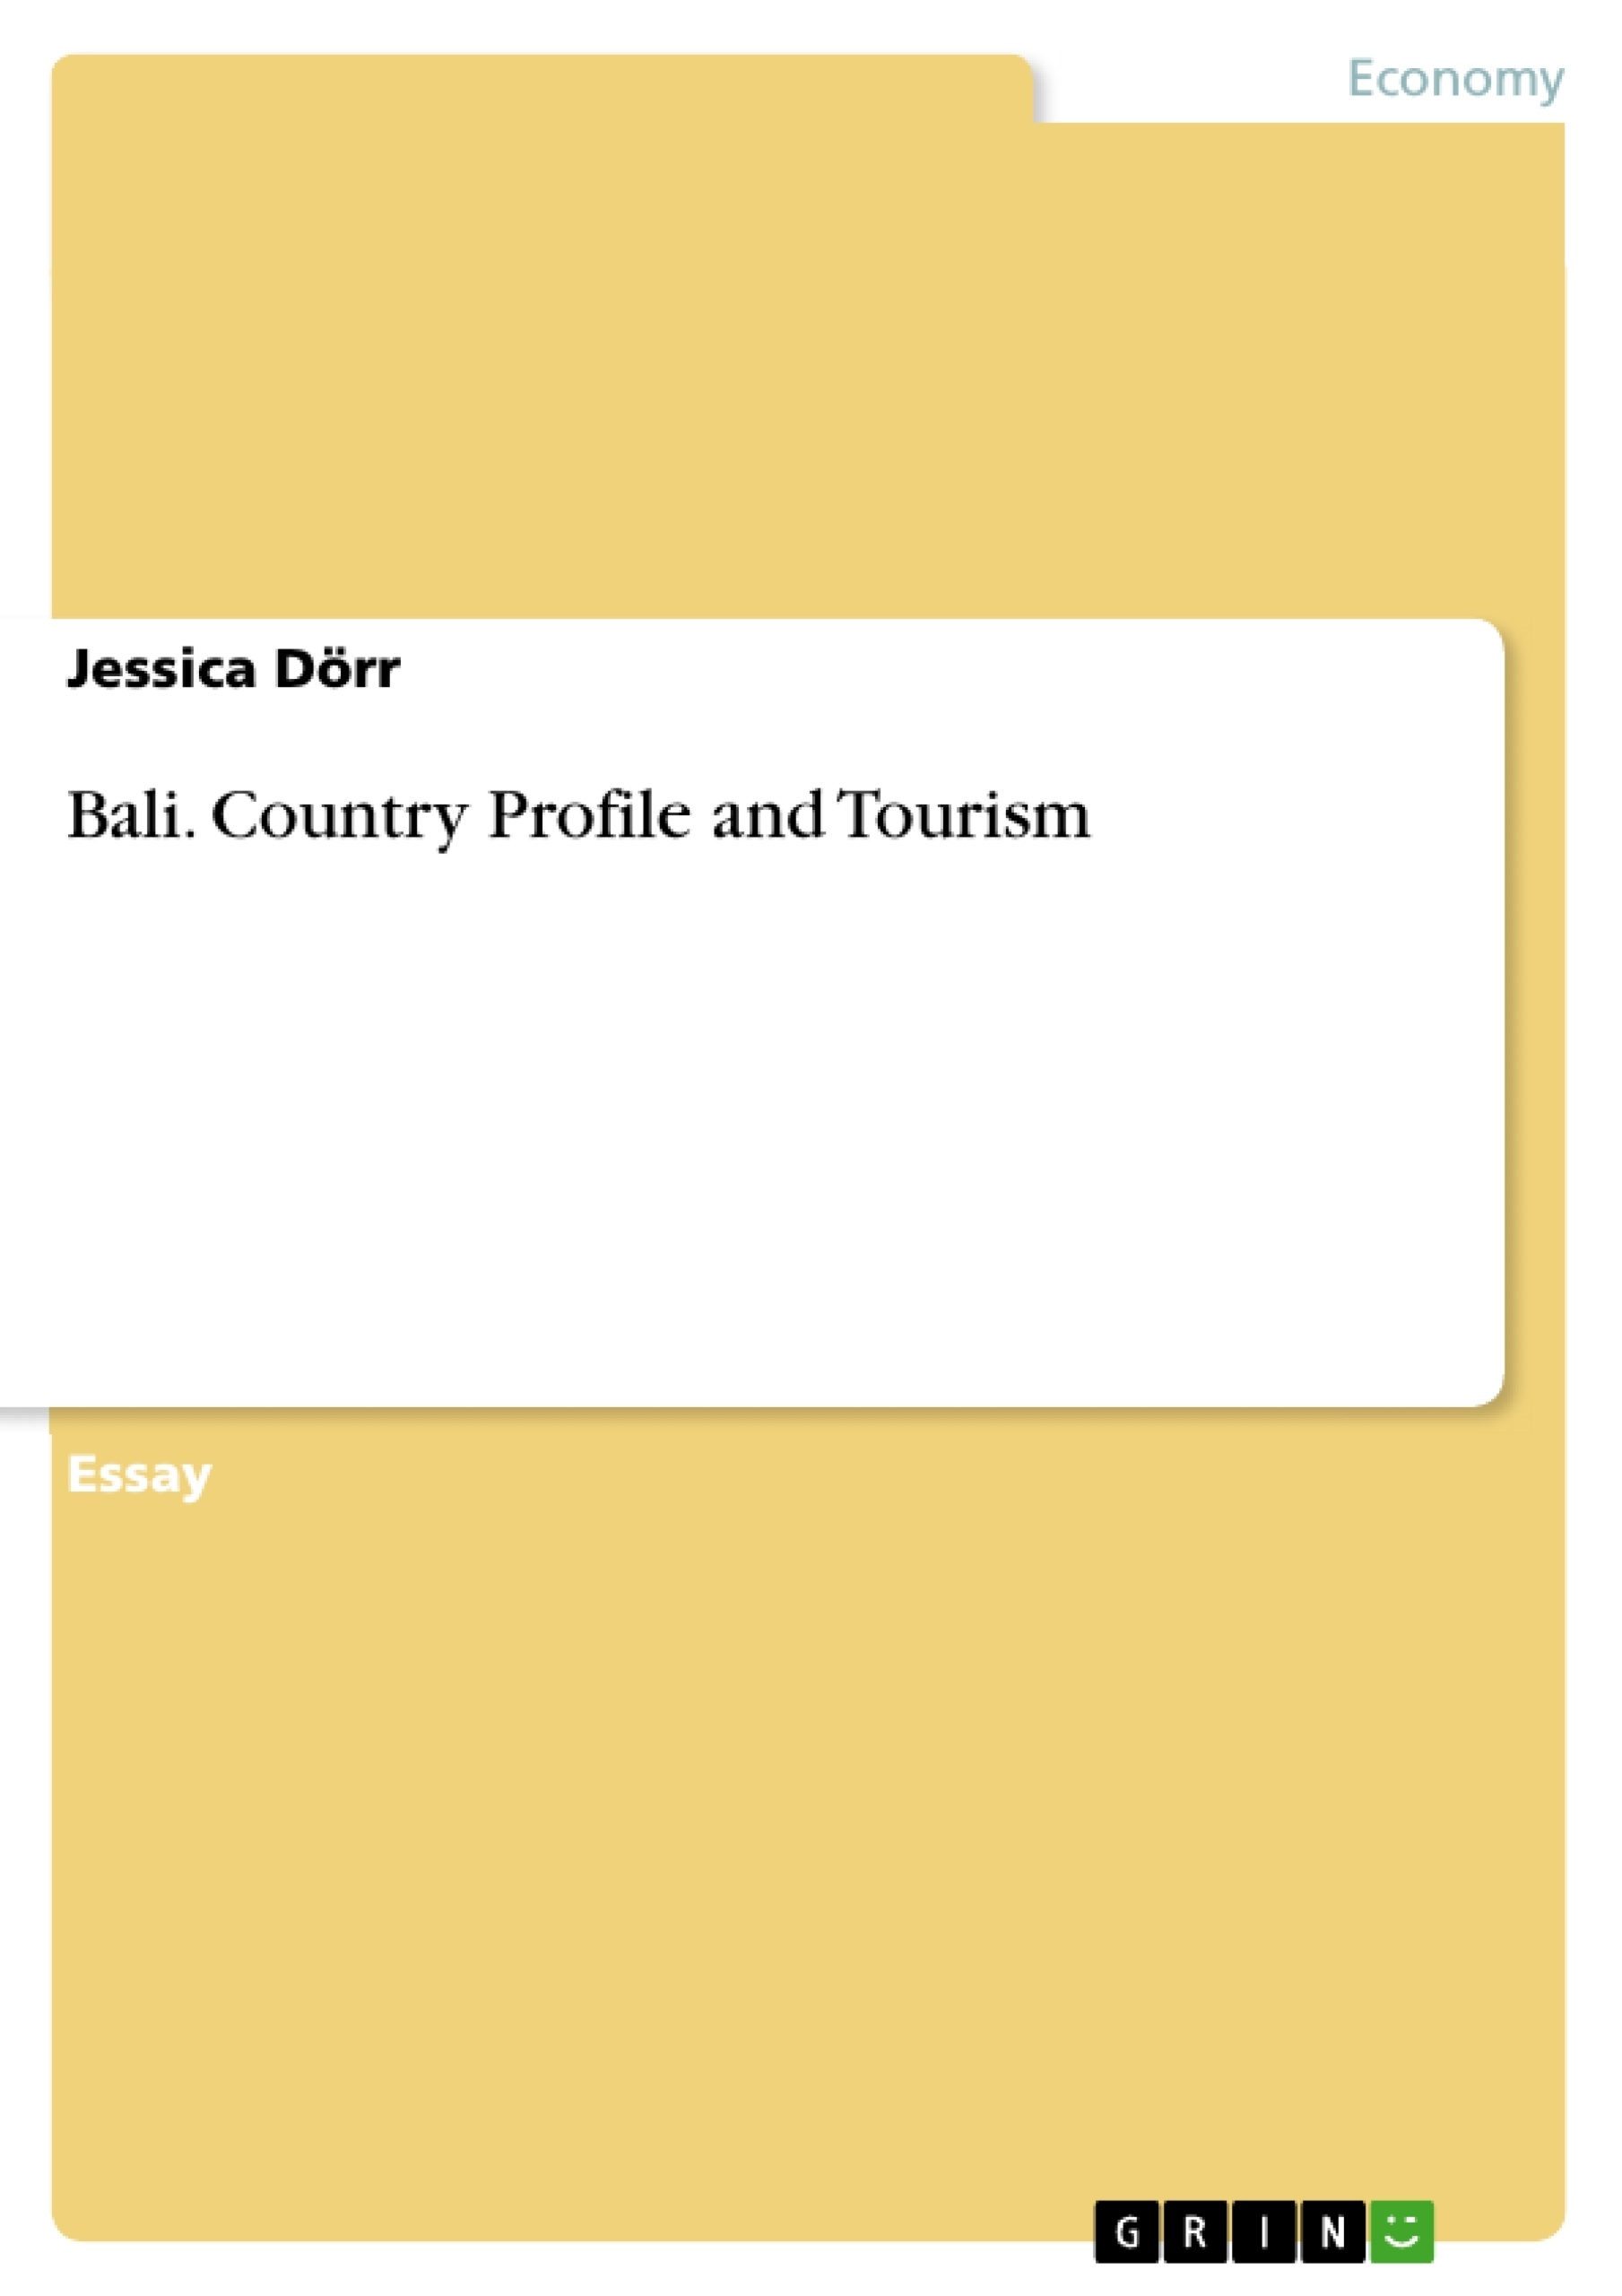 Titre: Bali. Country Profile and Tourism